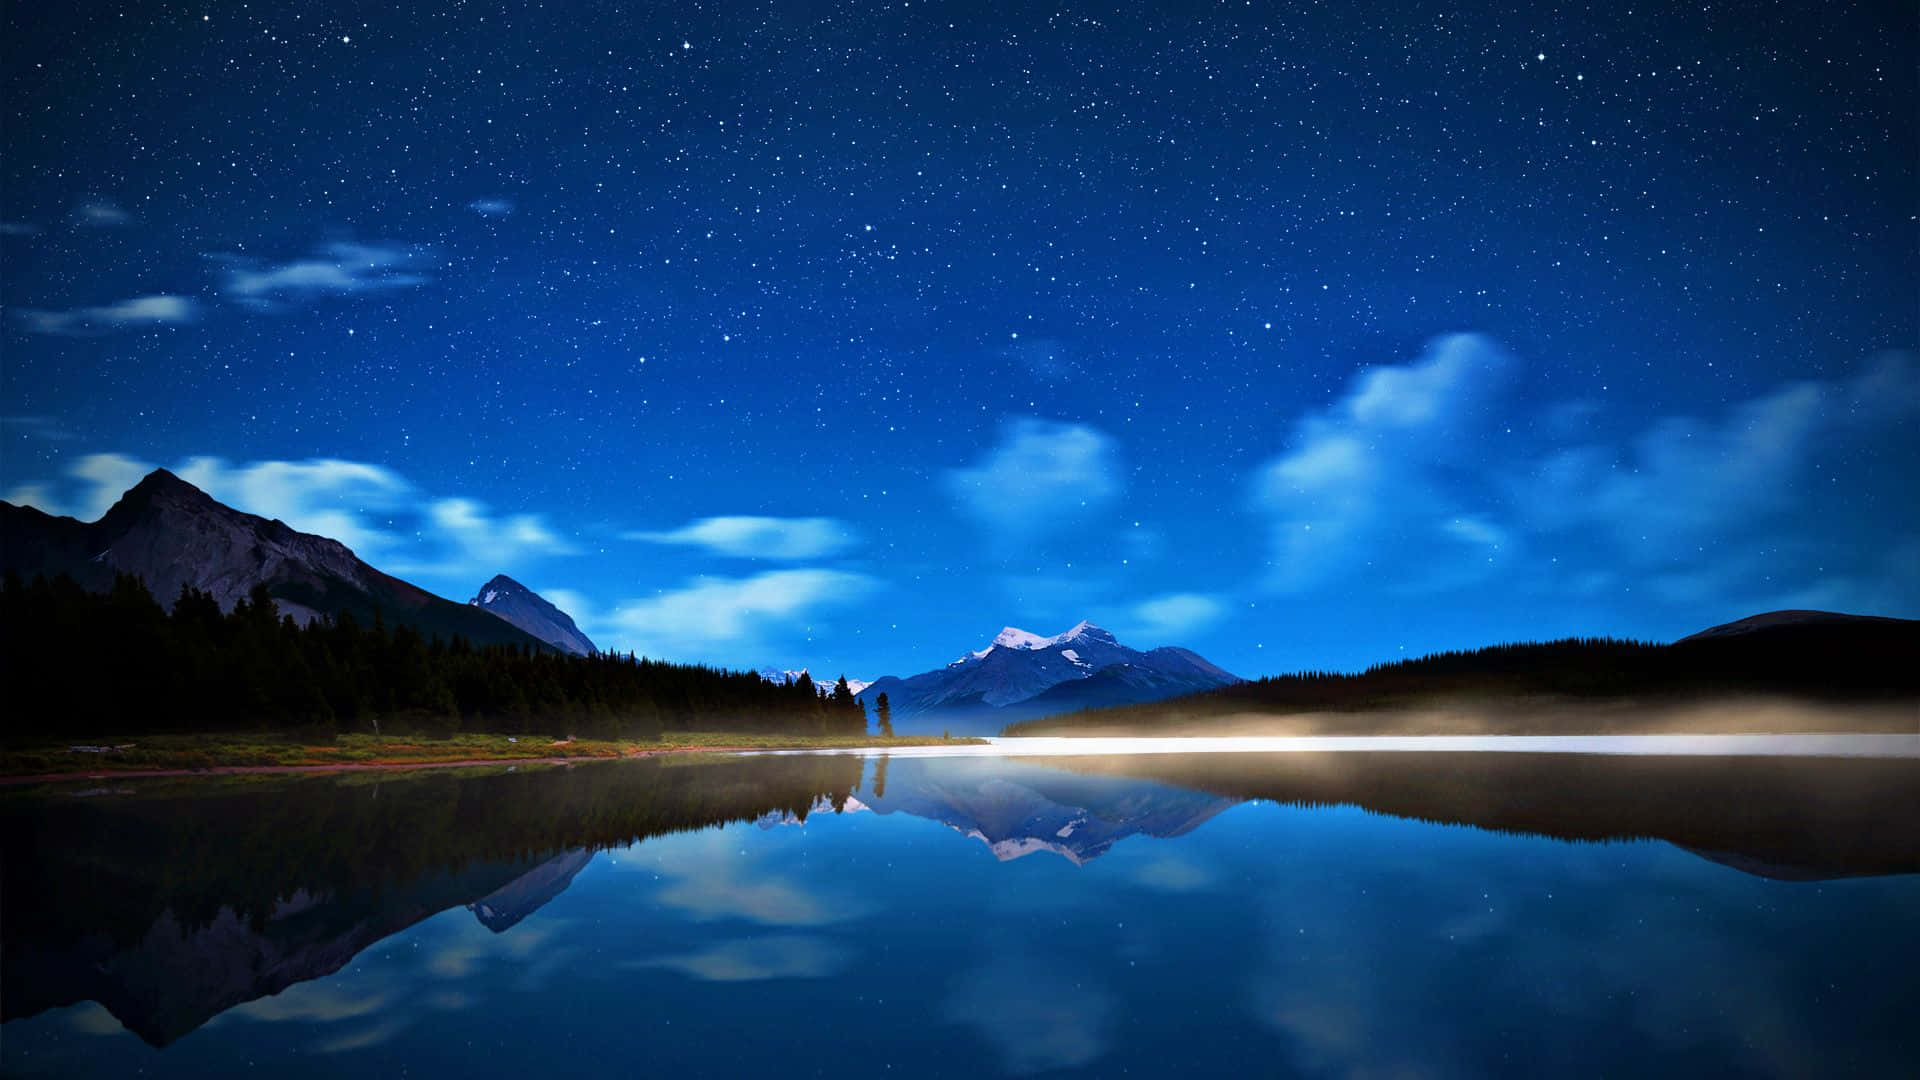 A Lake With Mountains And Stars In The Sky Wallpaper